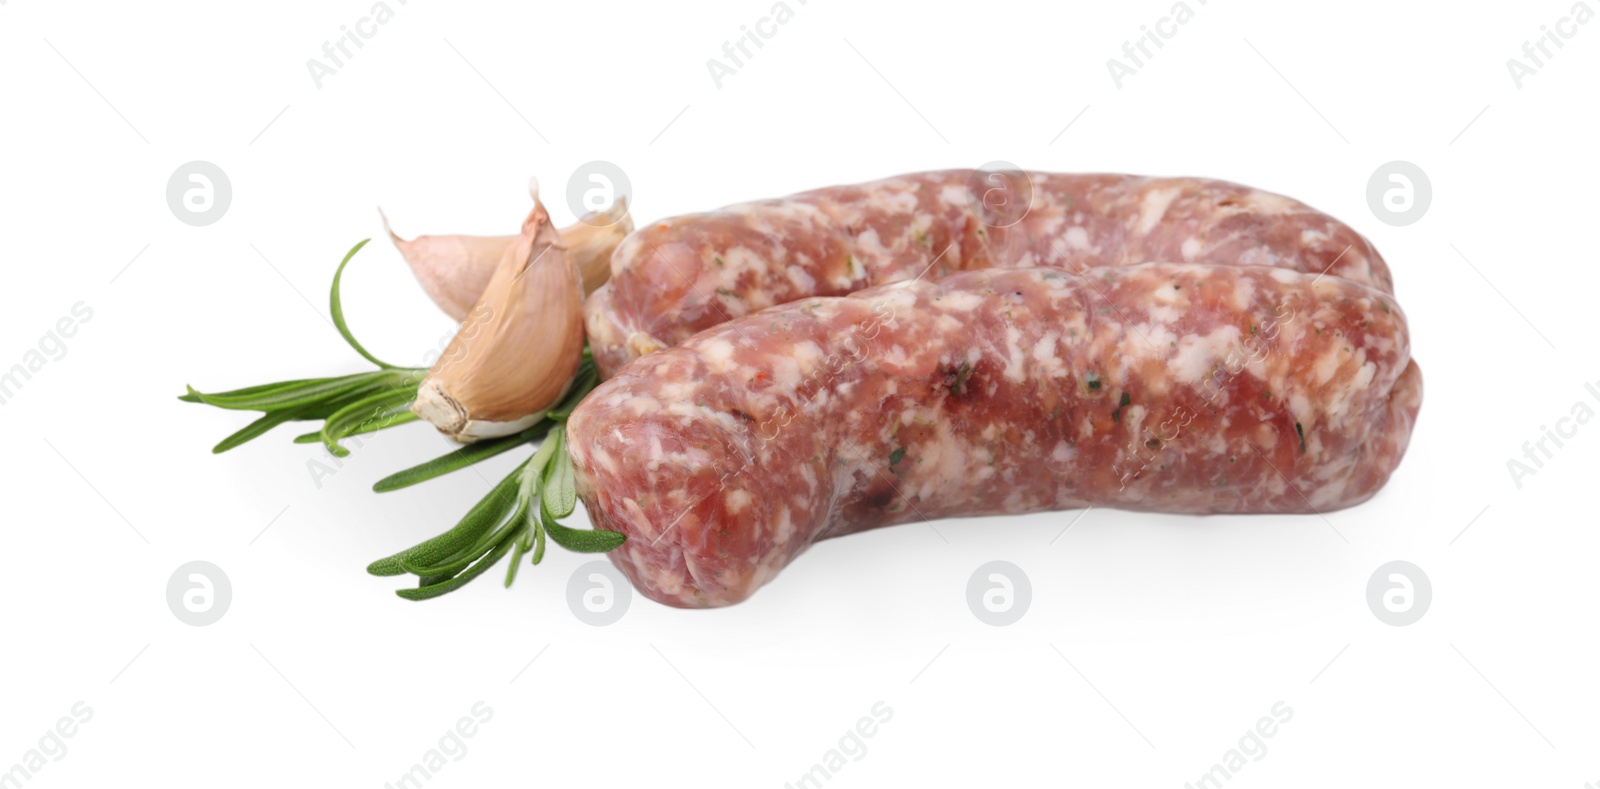 Photo of Raw homemade sausages, rosemary and garlic isolated on white